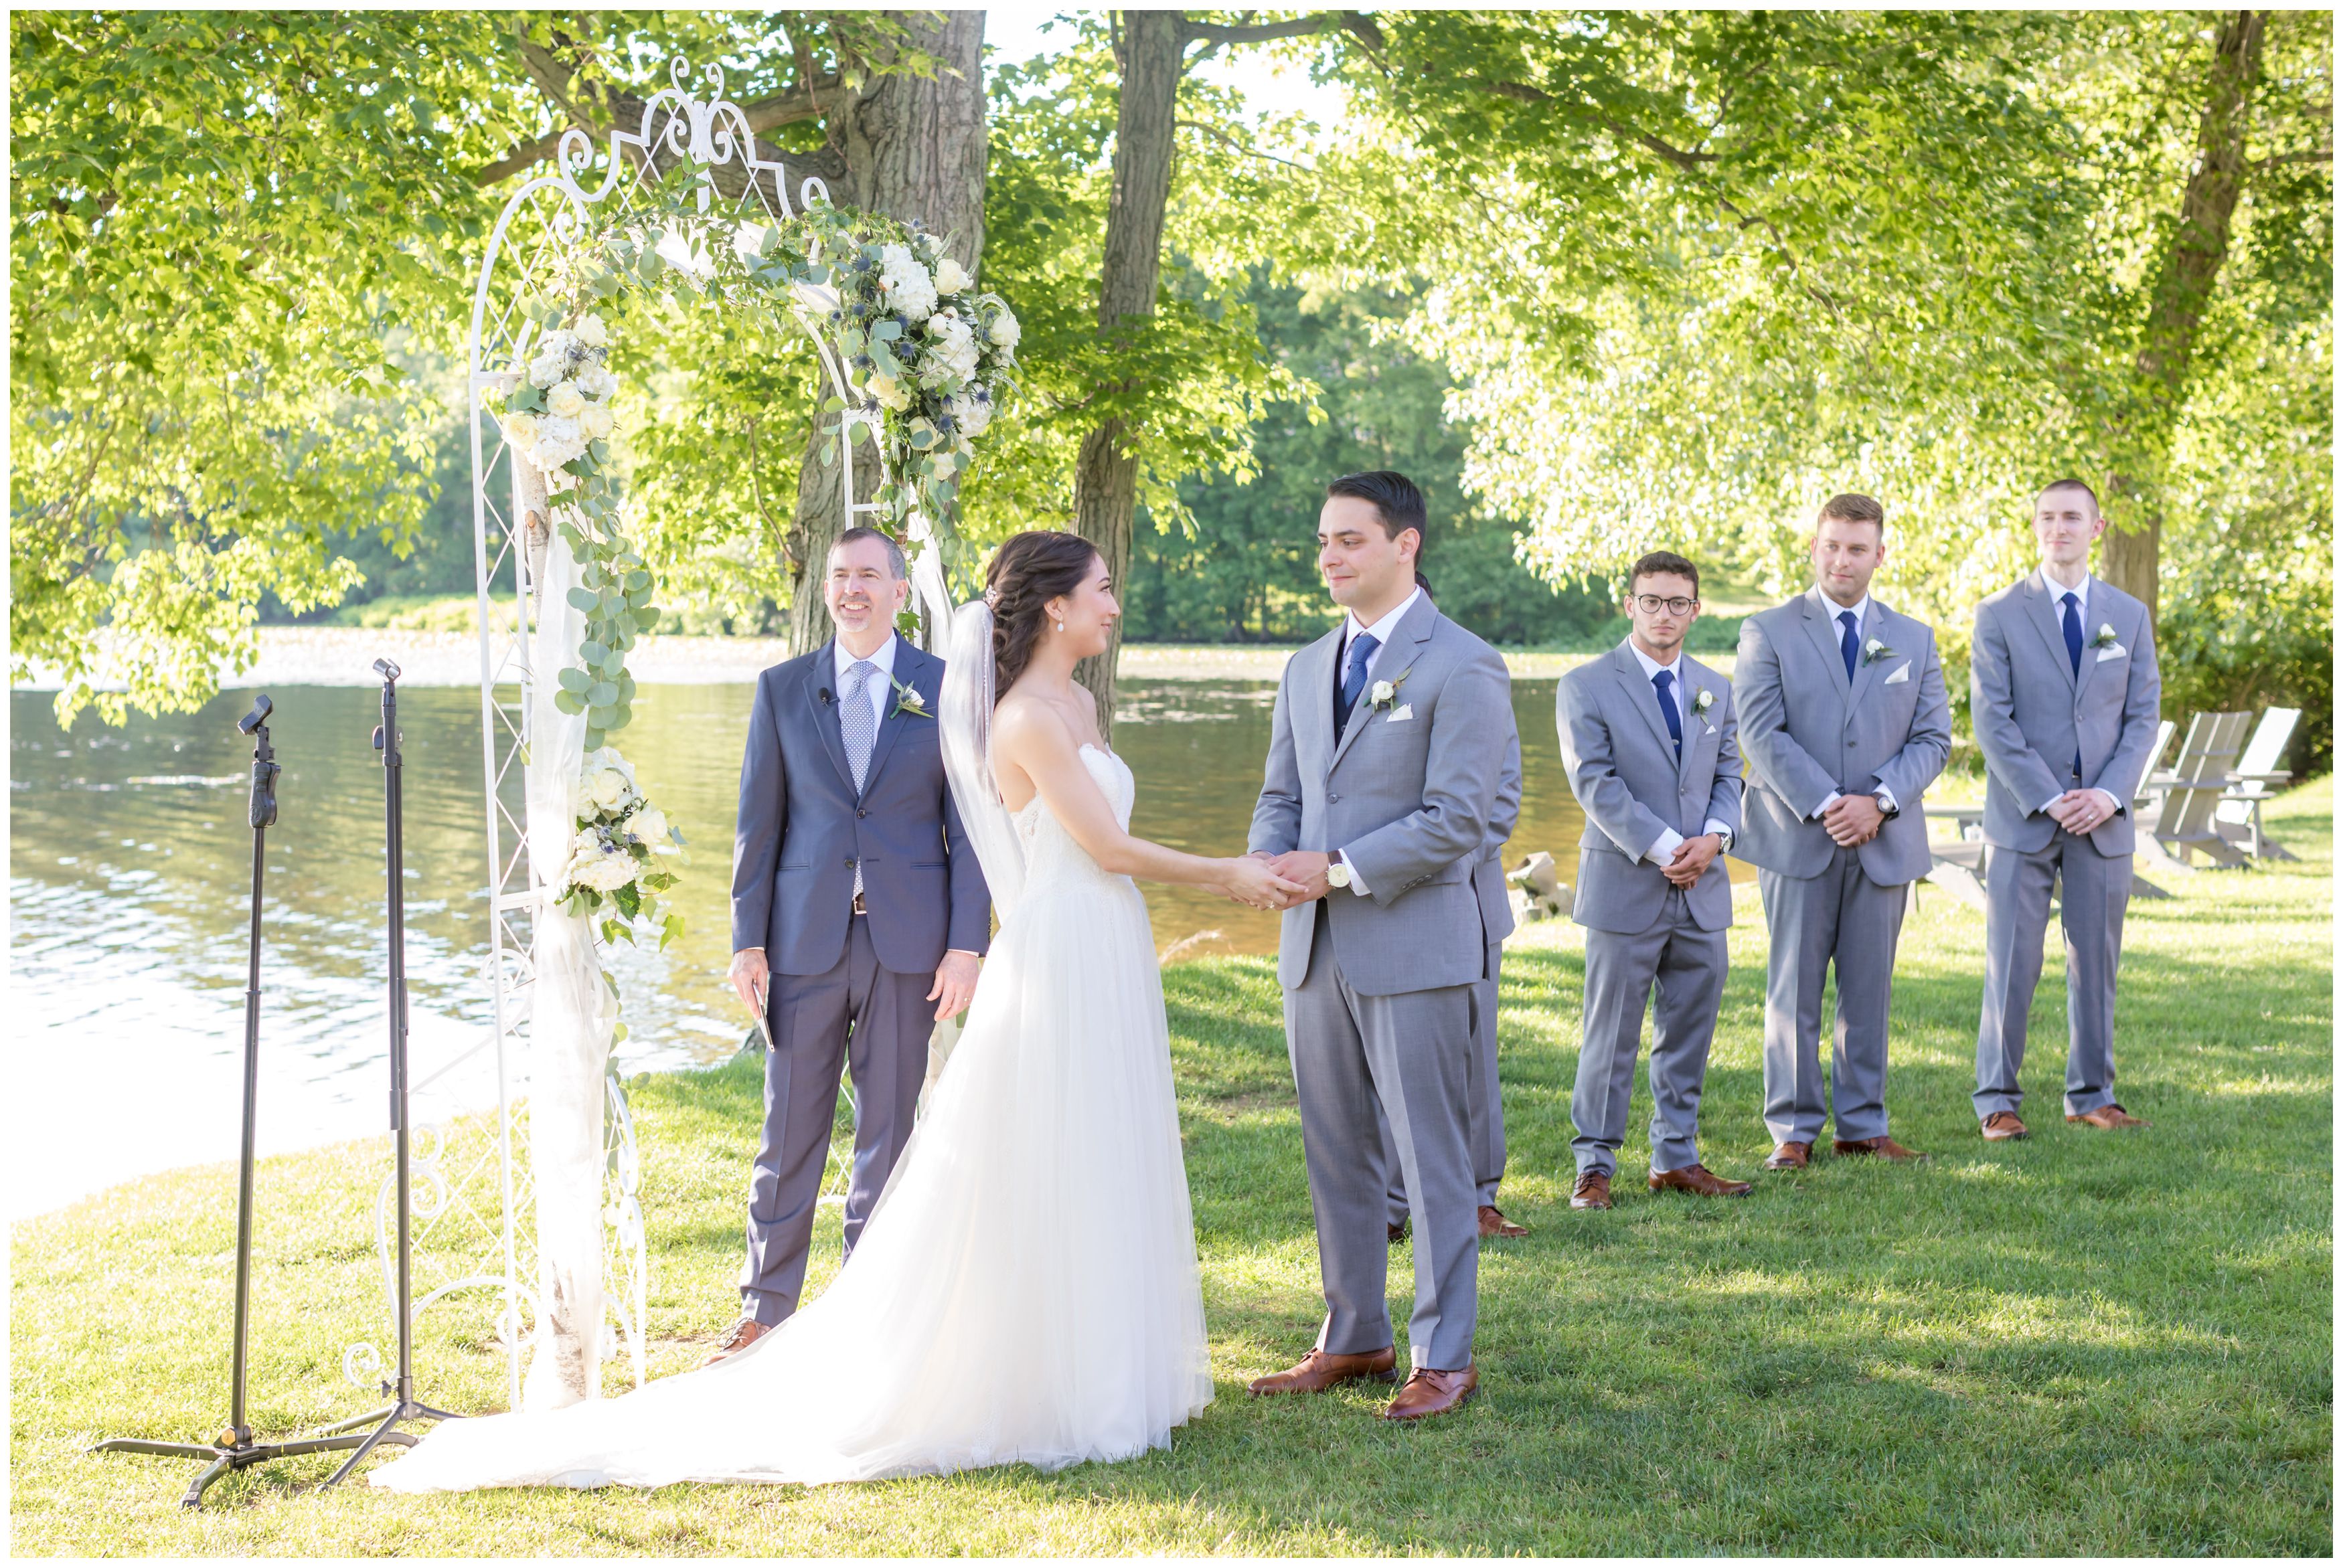 Bride and groom looking at each other during song at outdoor lakeside ceremony